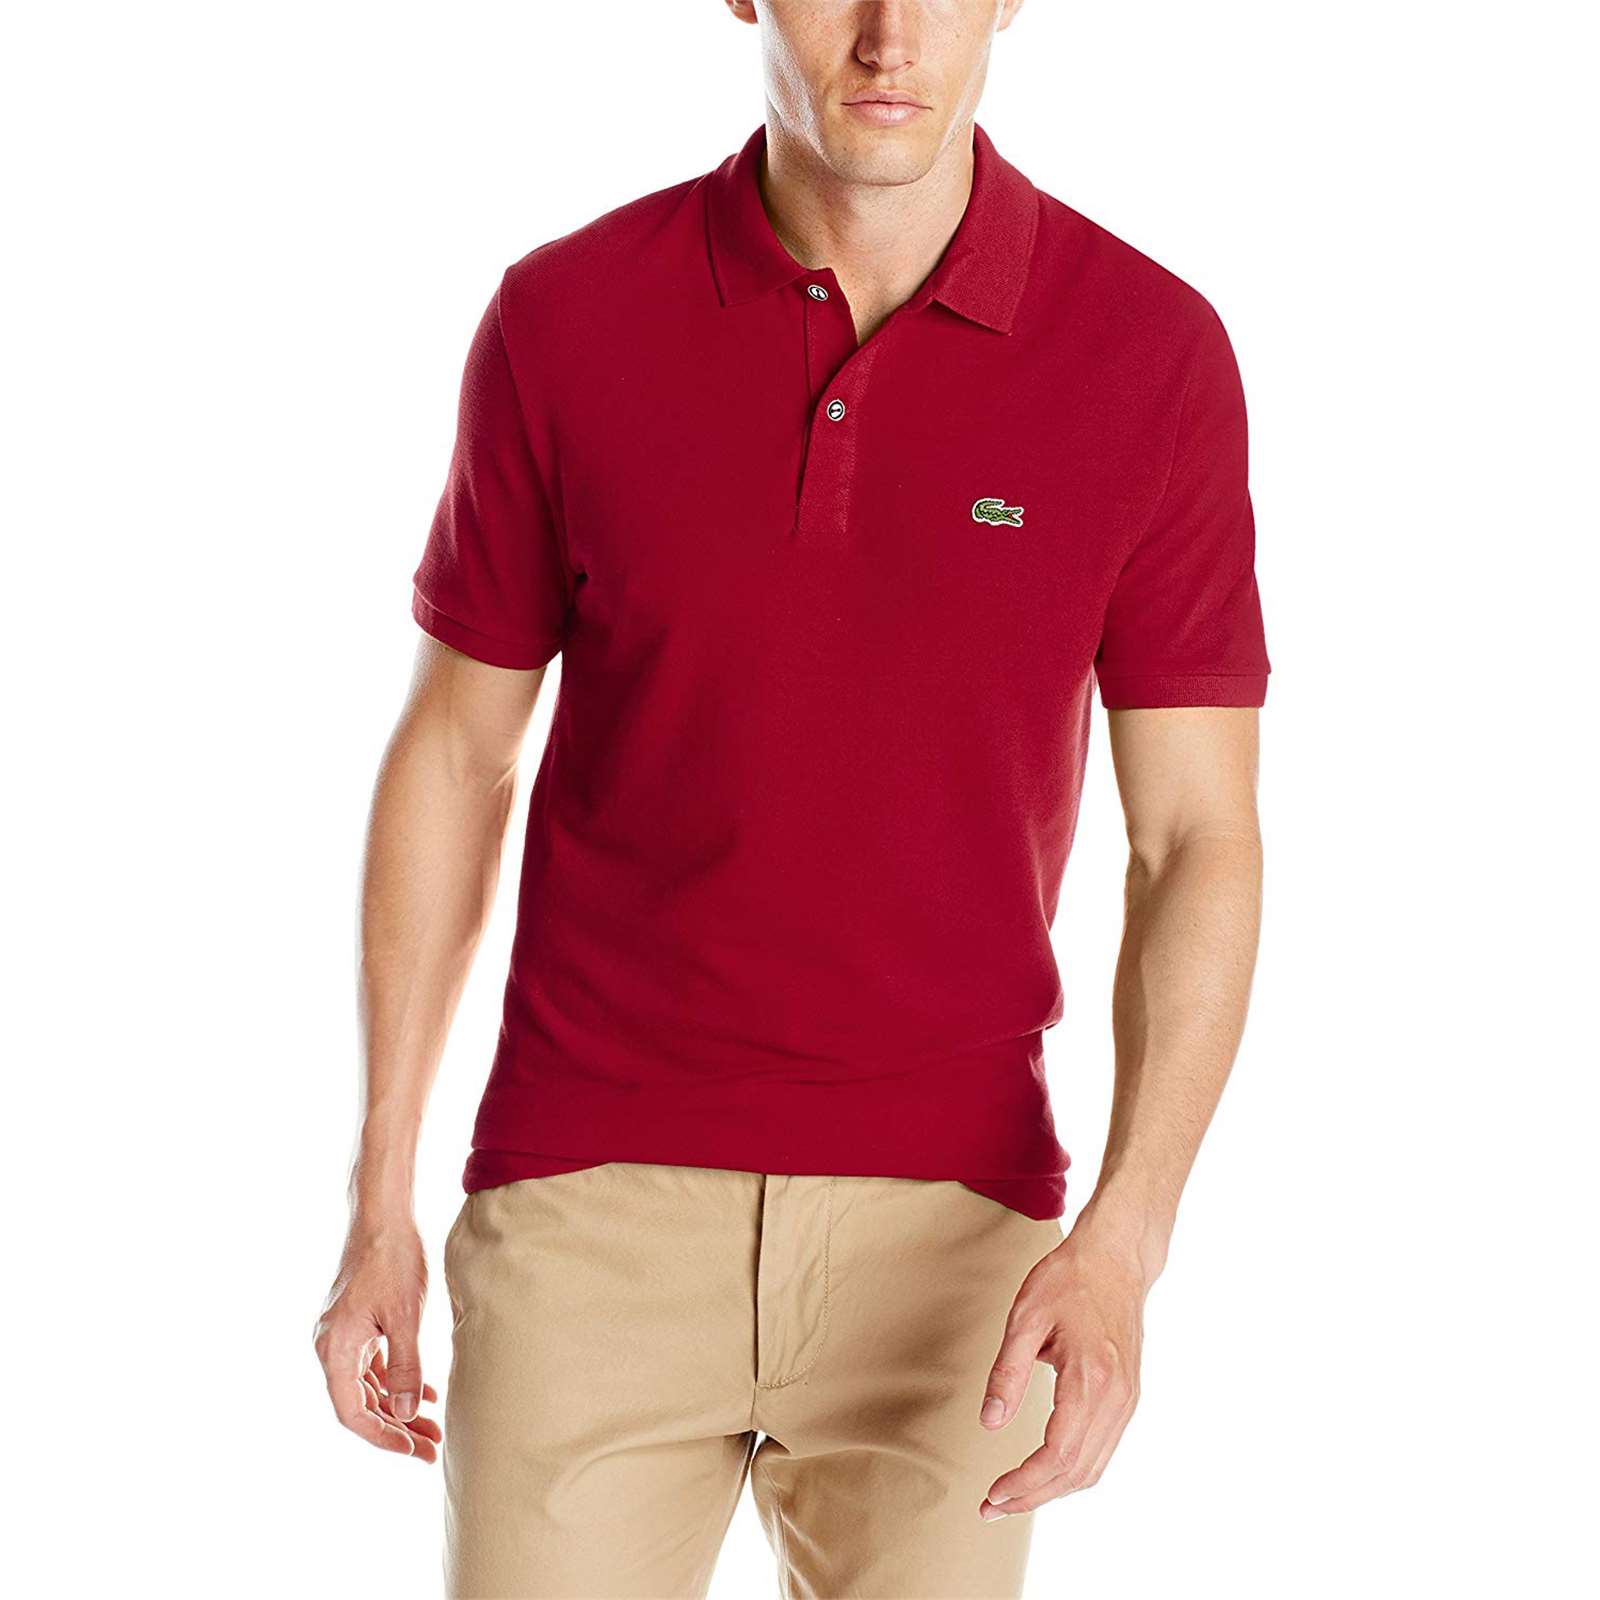 Lacoste Men Classic Pique Slim Fit Short Sleeve Polo - image 1 of 3